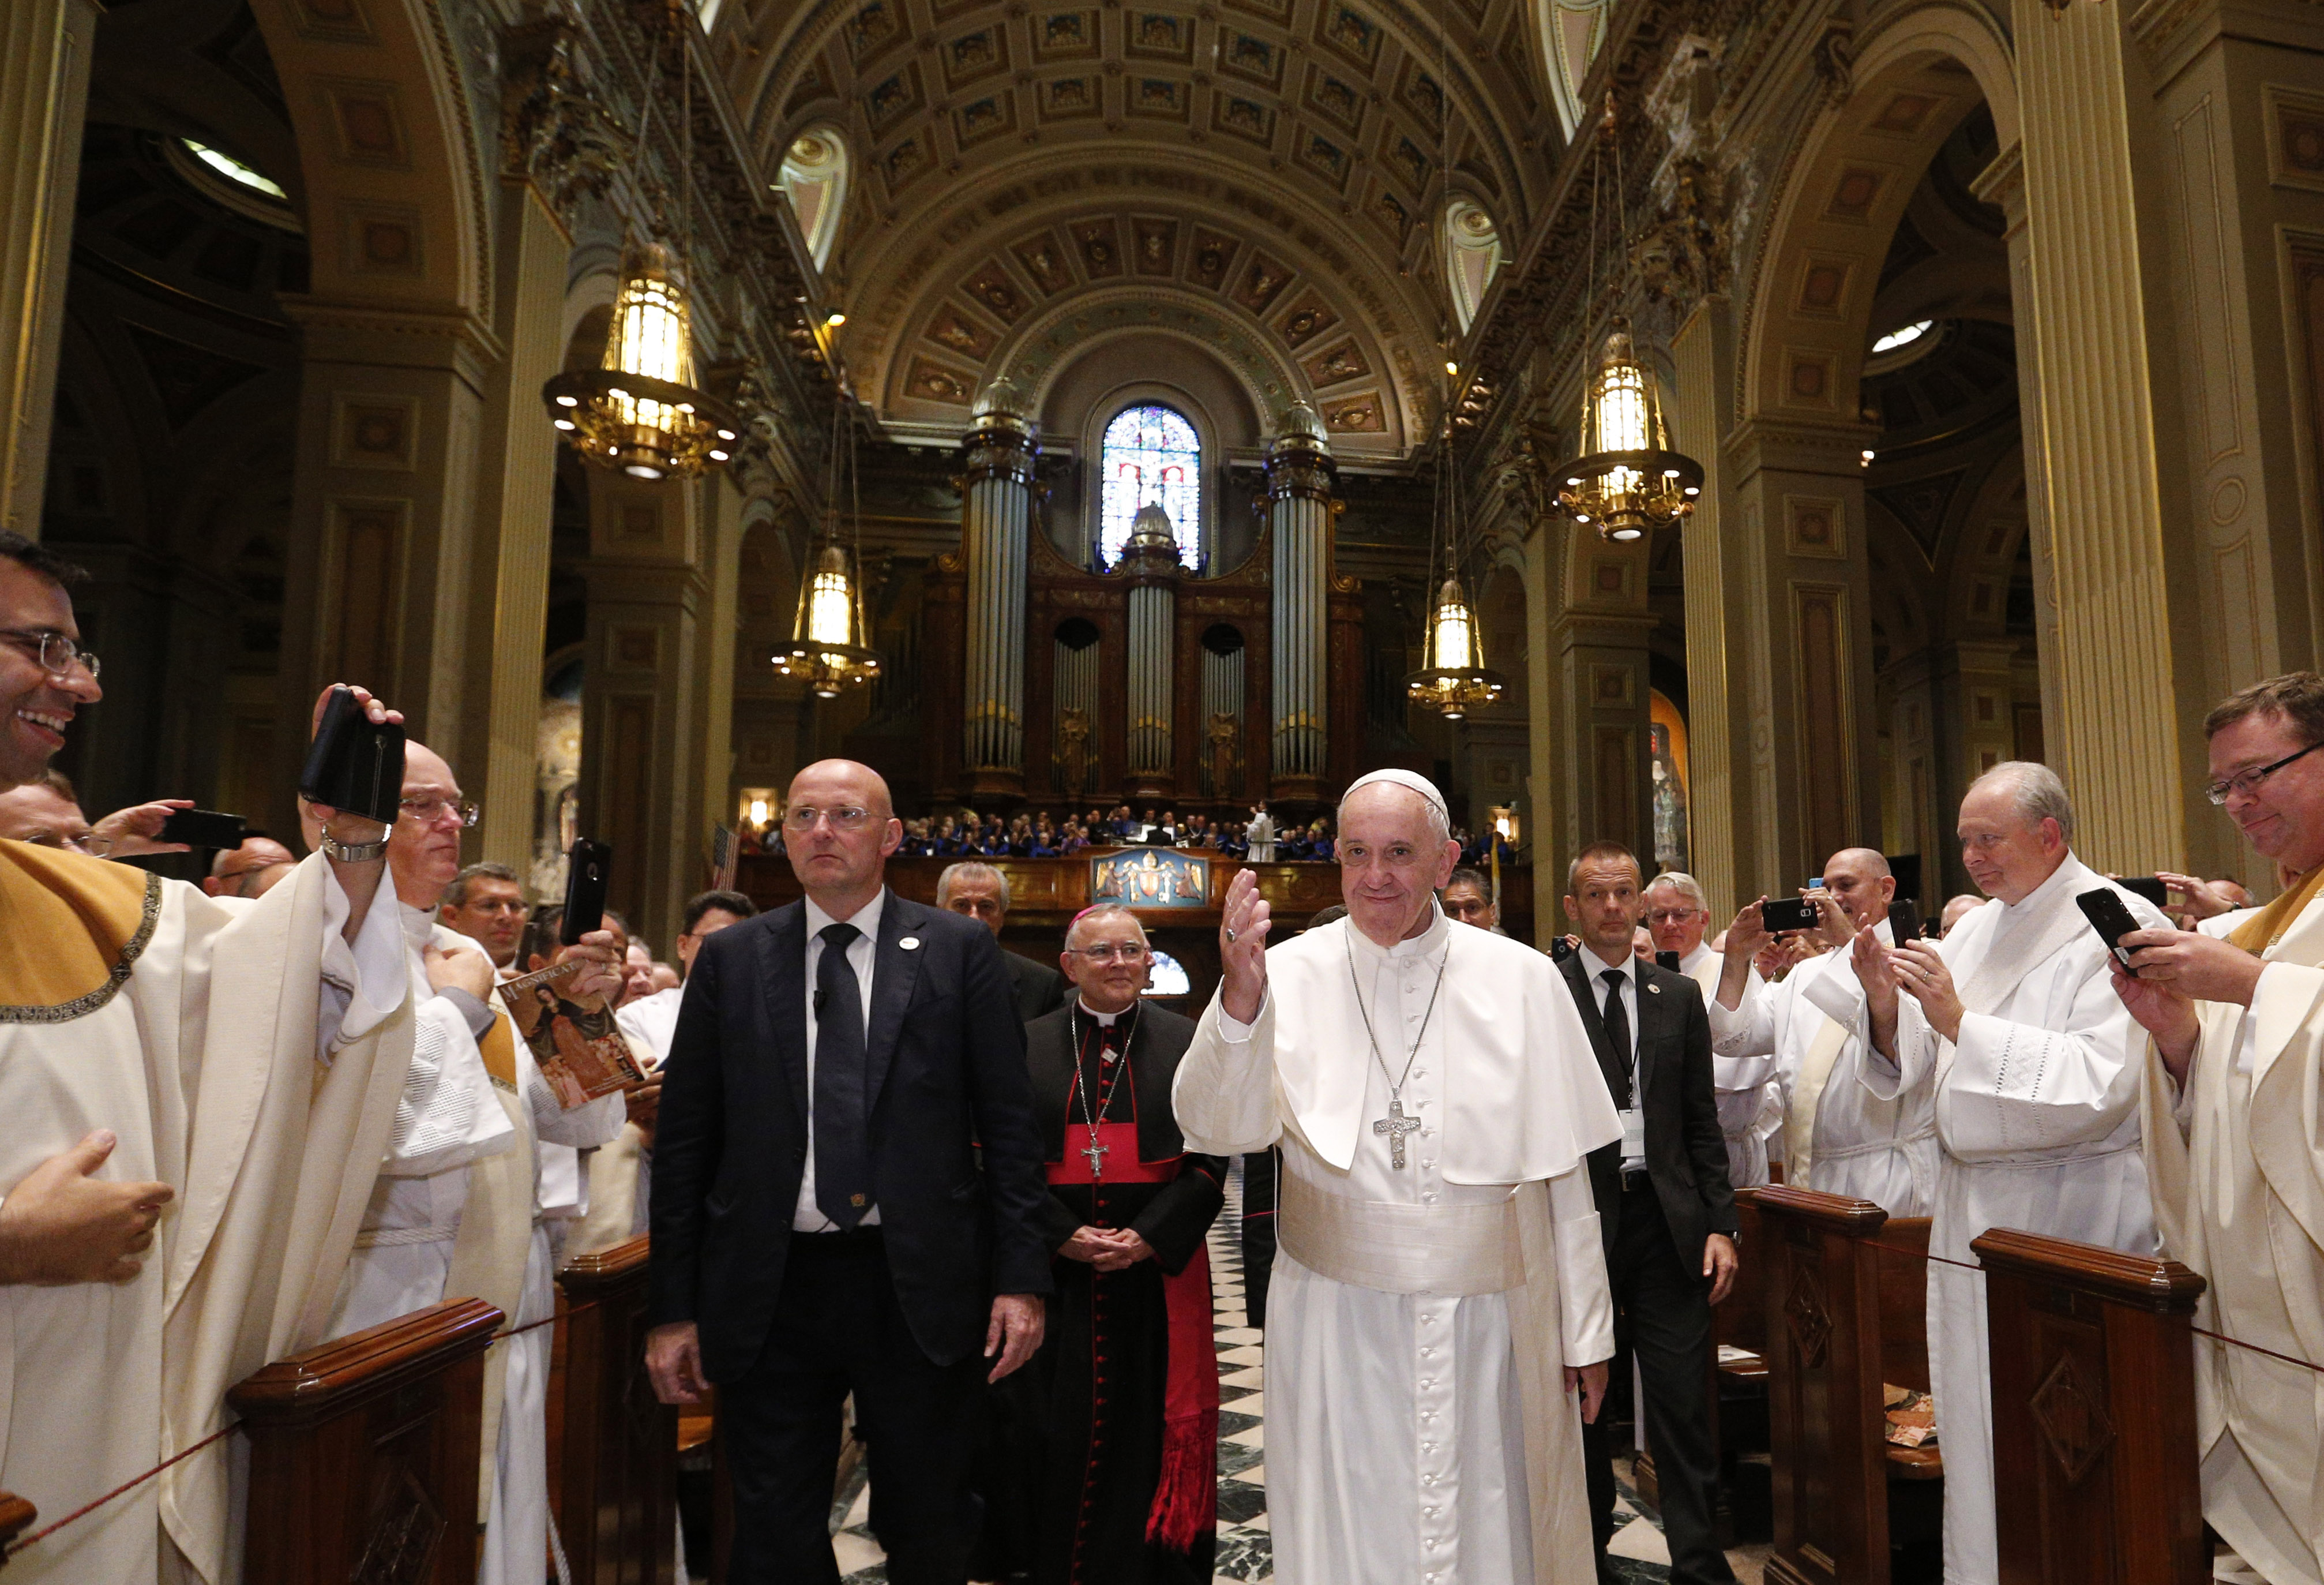 Pope Francis arrives to celebrate Mass with representatives from the Archdiocese of Philadelphia at the Cathedral Basilica of SS. Peter and Paul in Philadelphia Sept. 26. (CNS/Paul Haring)